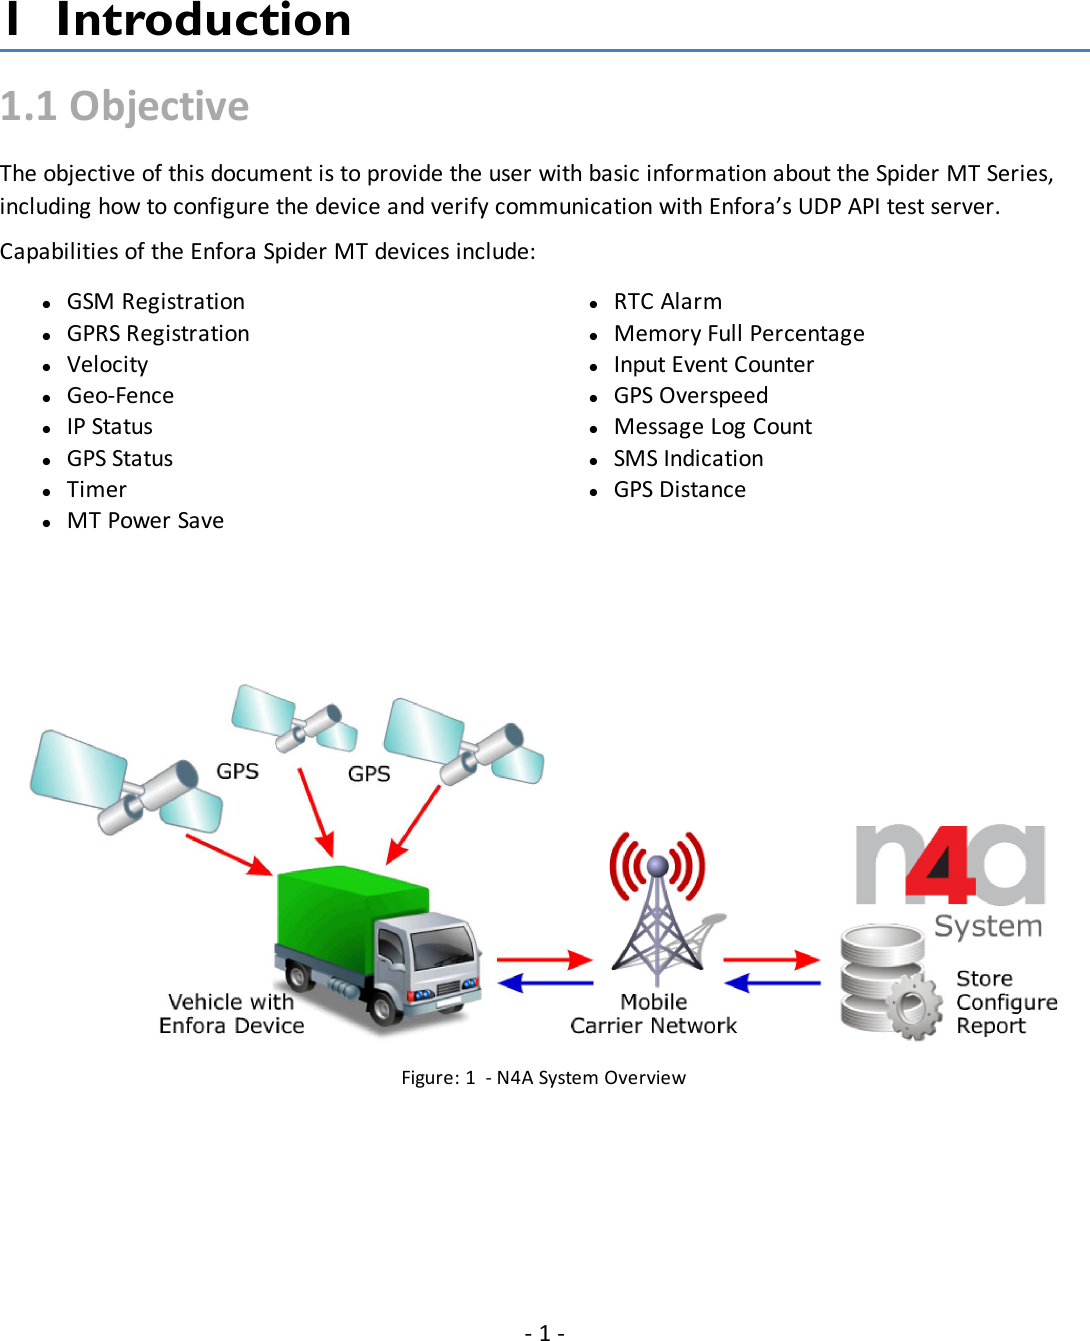 1 Introduction1.1 ObjectiveThe objective of this document is to provide the user with basic information about the Spider MT Series,including how to configure the device and verify communication with Enfora’s UDP API test server.Capabilities of the Enfora Spider MT devices include:lGSM RegistrationlGPRS RegistrationlVelocitylGeo-FencelIP StatuslGPS StatuslTimerlMT Power SavelRTC AlarmlMemory Full PercentagelInput Event CounterlGPS OverspeedlMessage Log CountlSMS IndicationlGPS DistanceFigure: 1 - N4A System Overview-1-